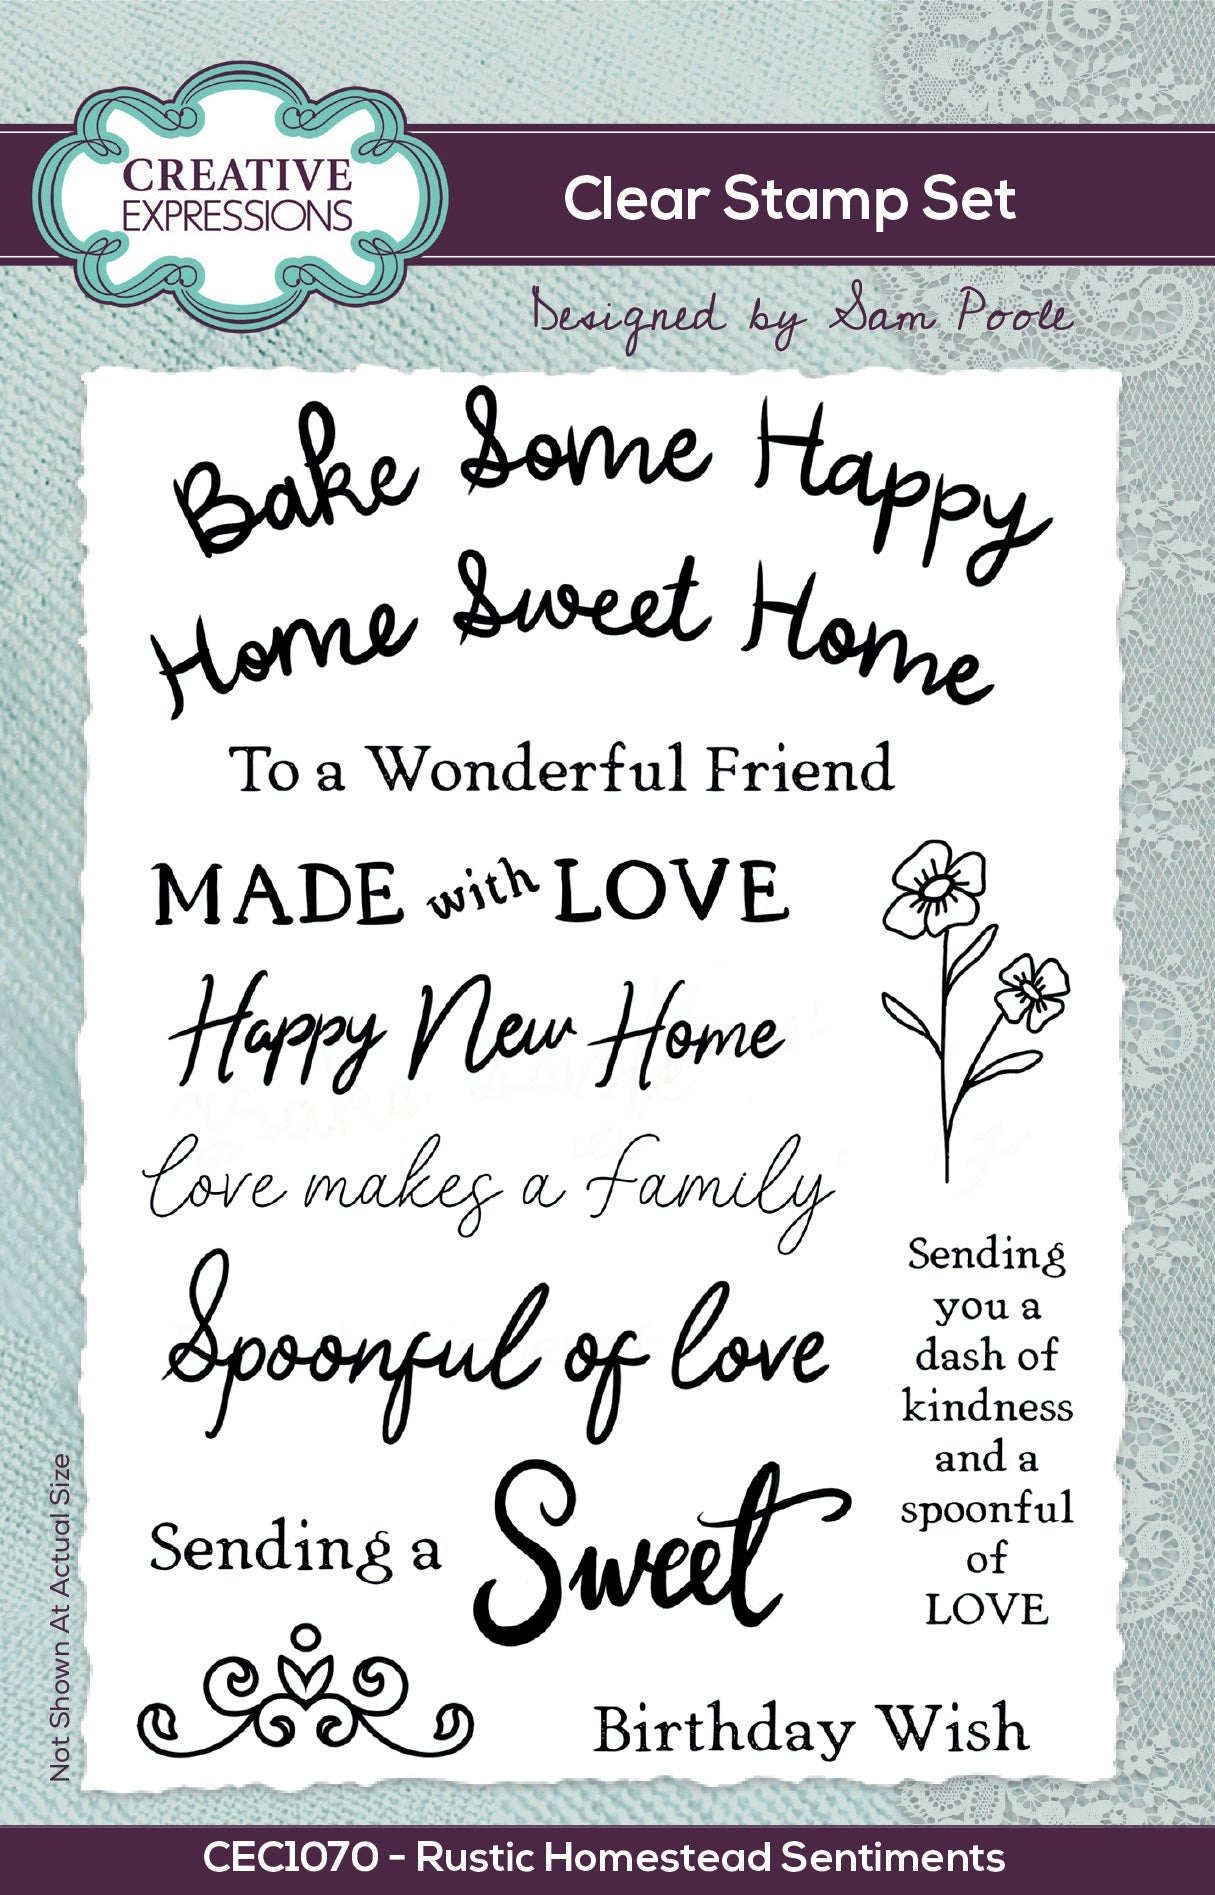 Creative Expressions Sam Poole Rustic Homestead Sentiments 4 in x 6 in Clear Stamp Set